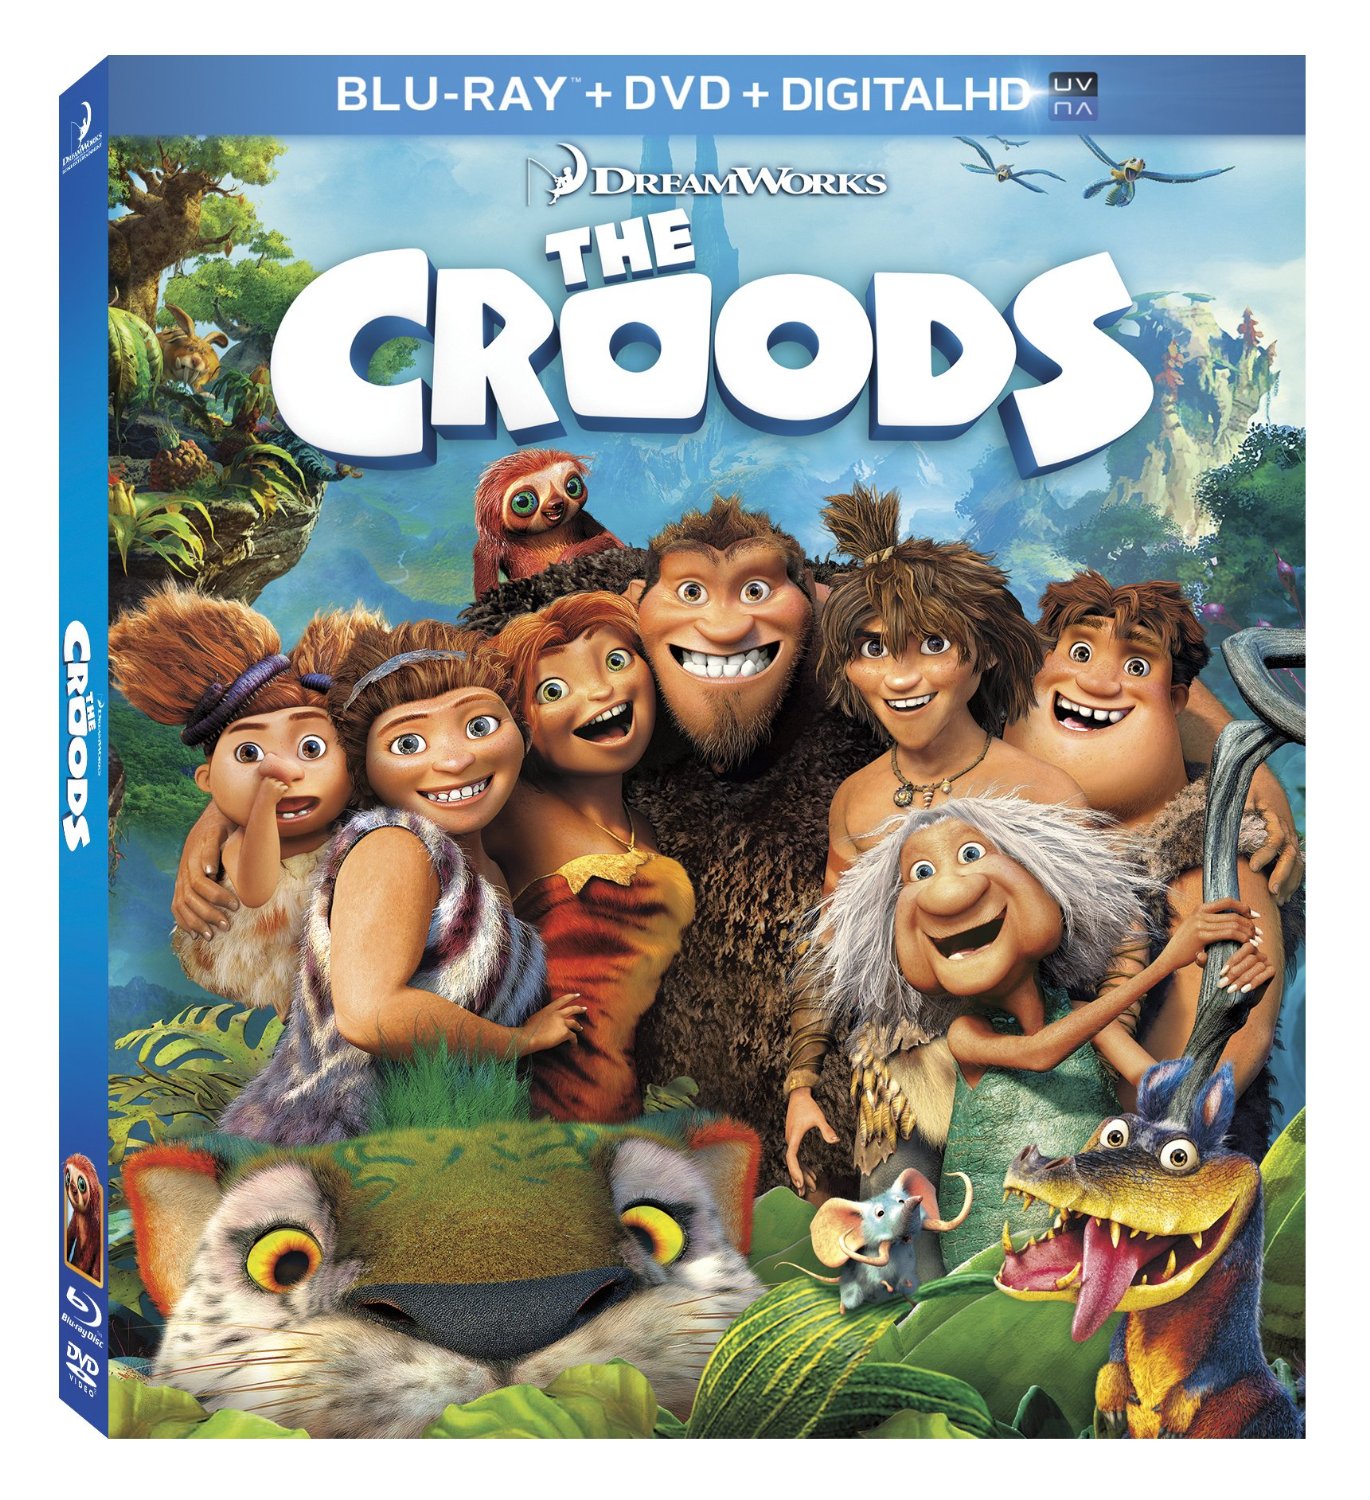 The Croods DVD cover